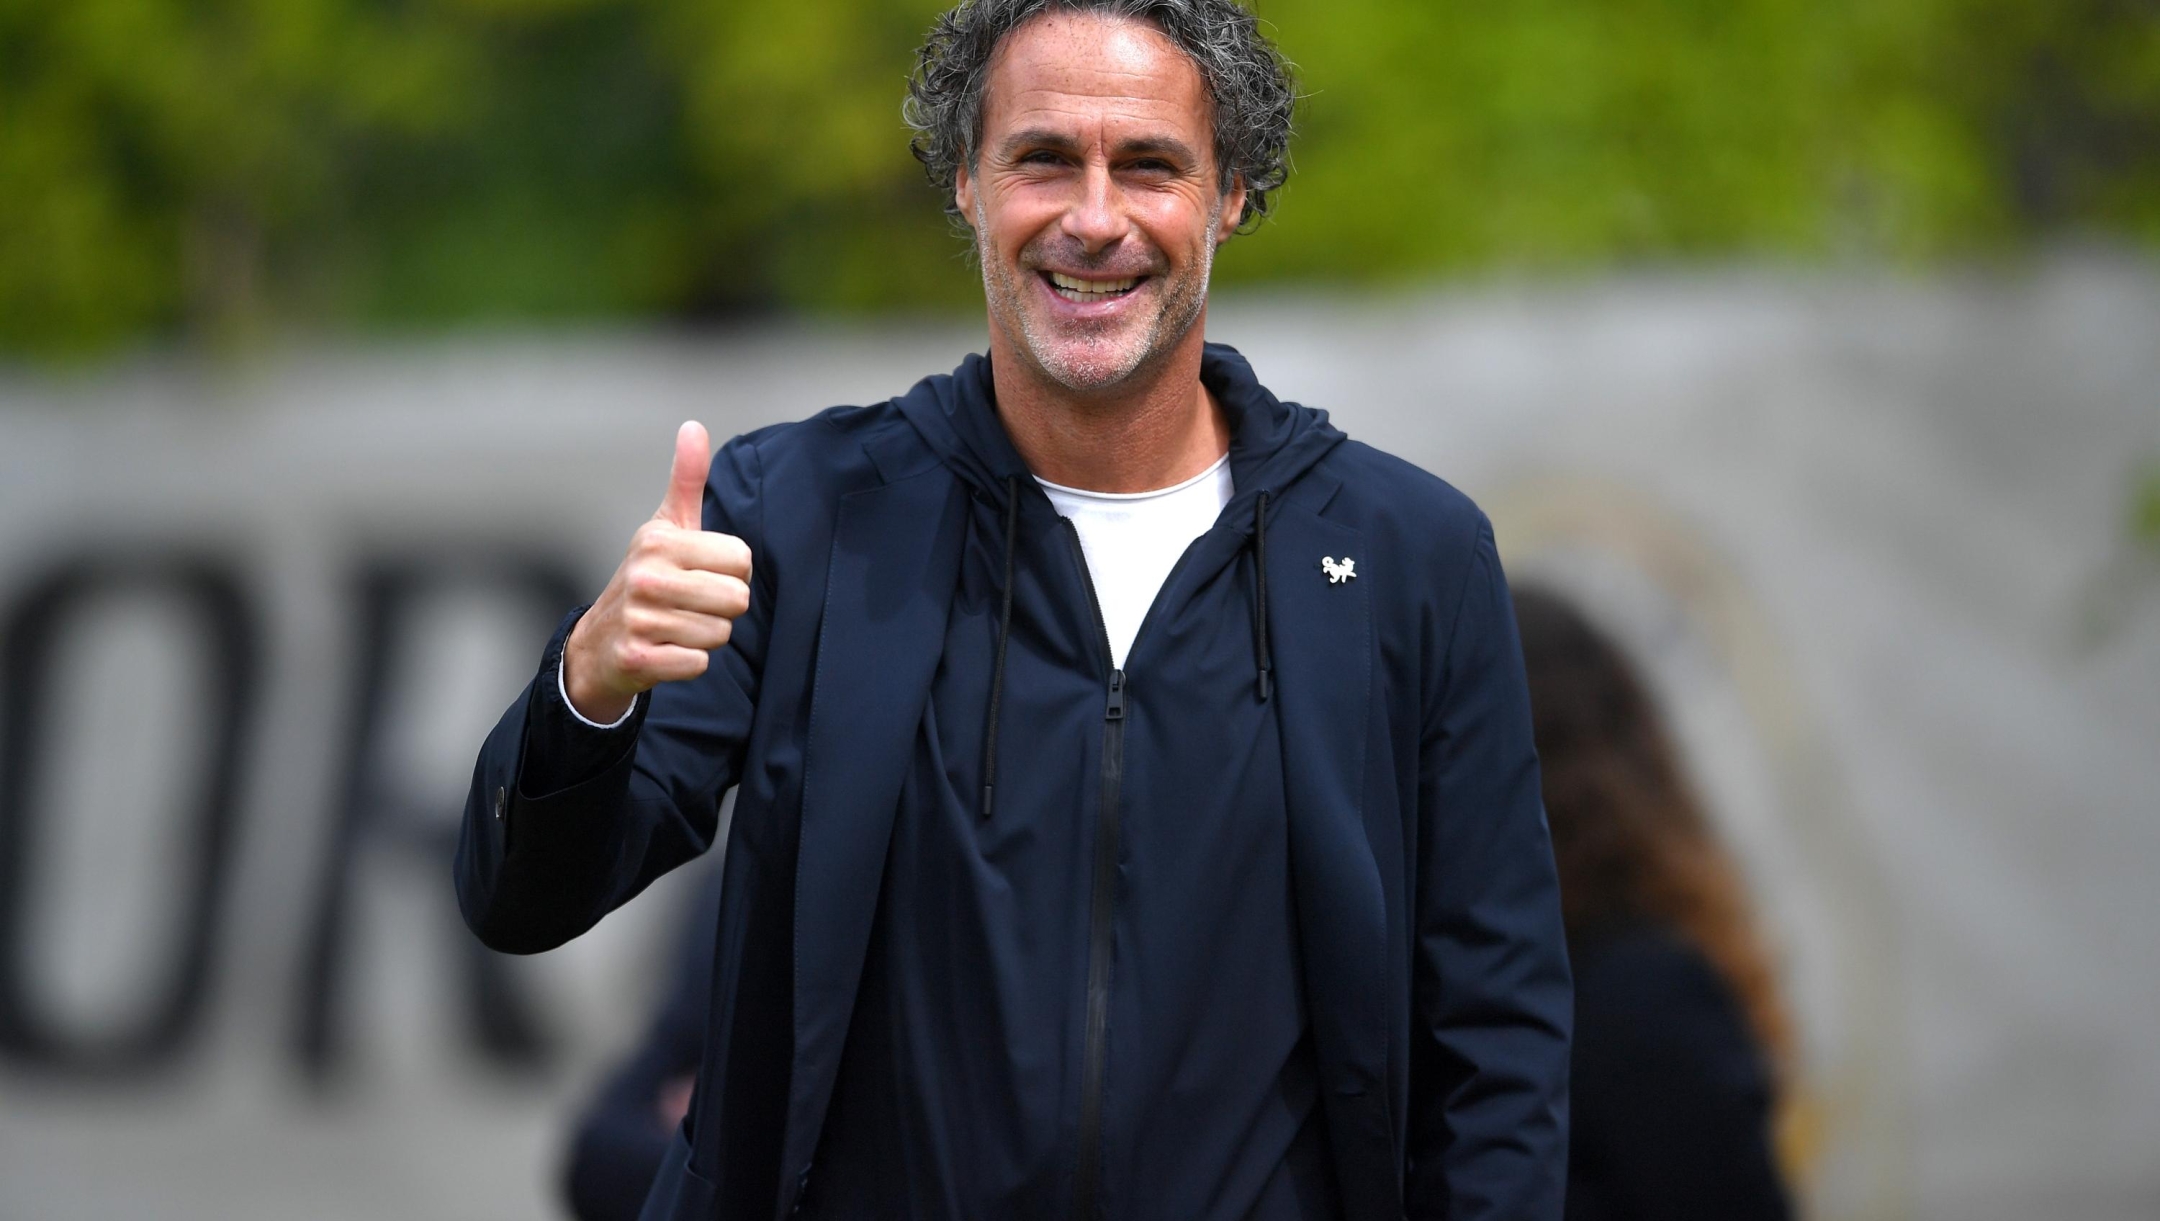 SESTO SAN GIOVANNI, ITALY - APRIL 15: Fabio Galante poses for a picture before the Women Serie A match between FC Internazionale Women and AS Roma Women at Stadio Breda on April 15, 2023 in Sesto San Giovanni, Italy. (Photo by Mattia Pistoia - Inter/Inter via Getty Images)